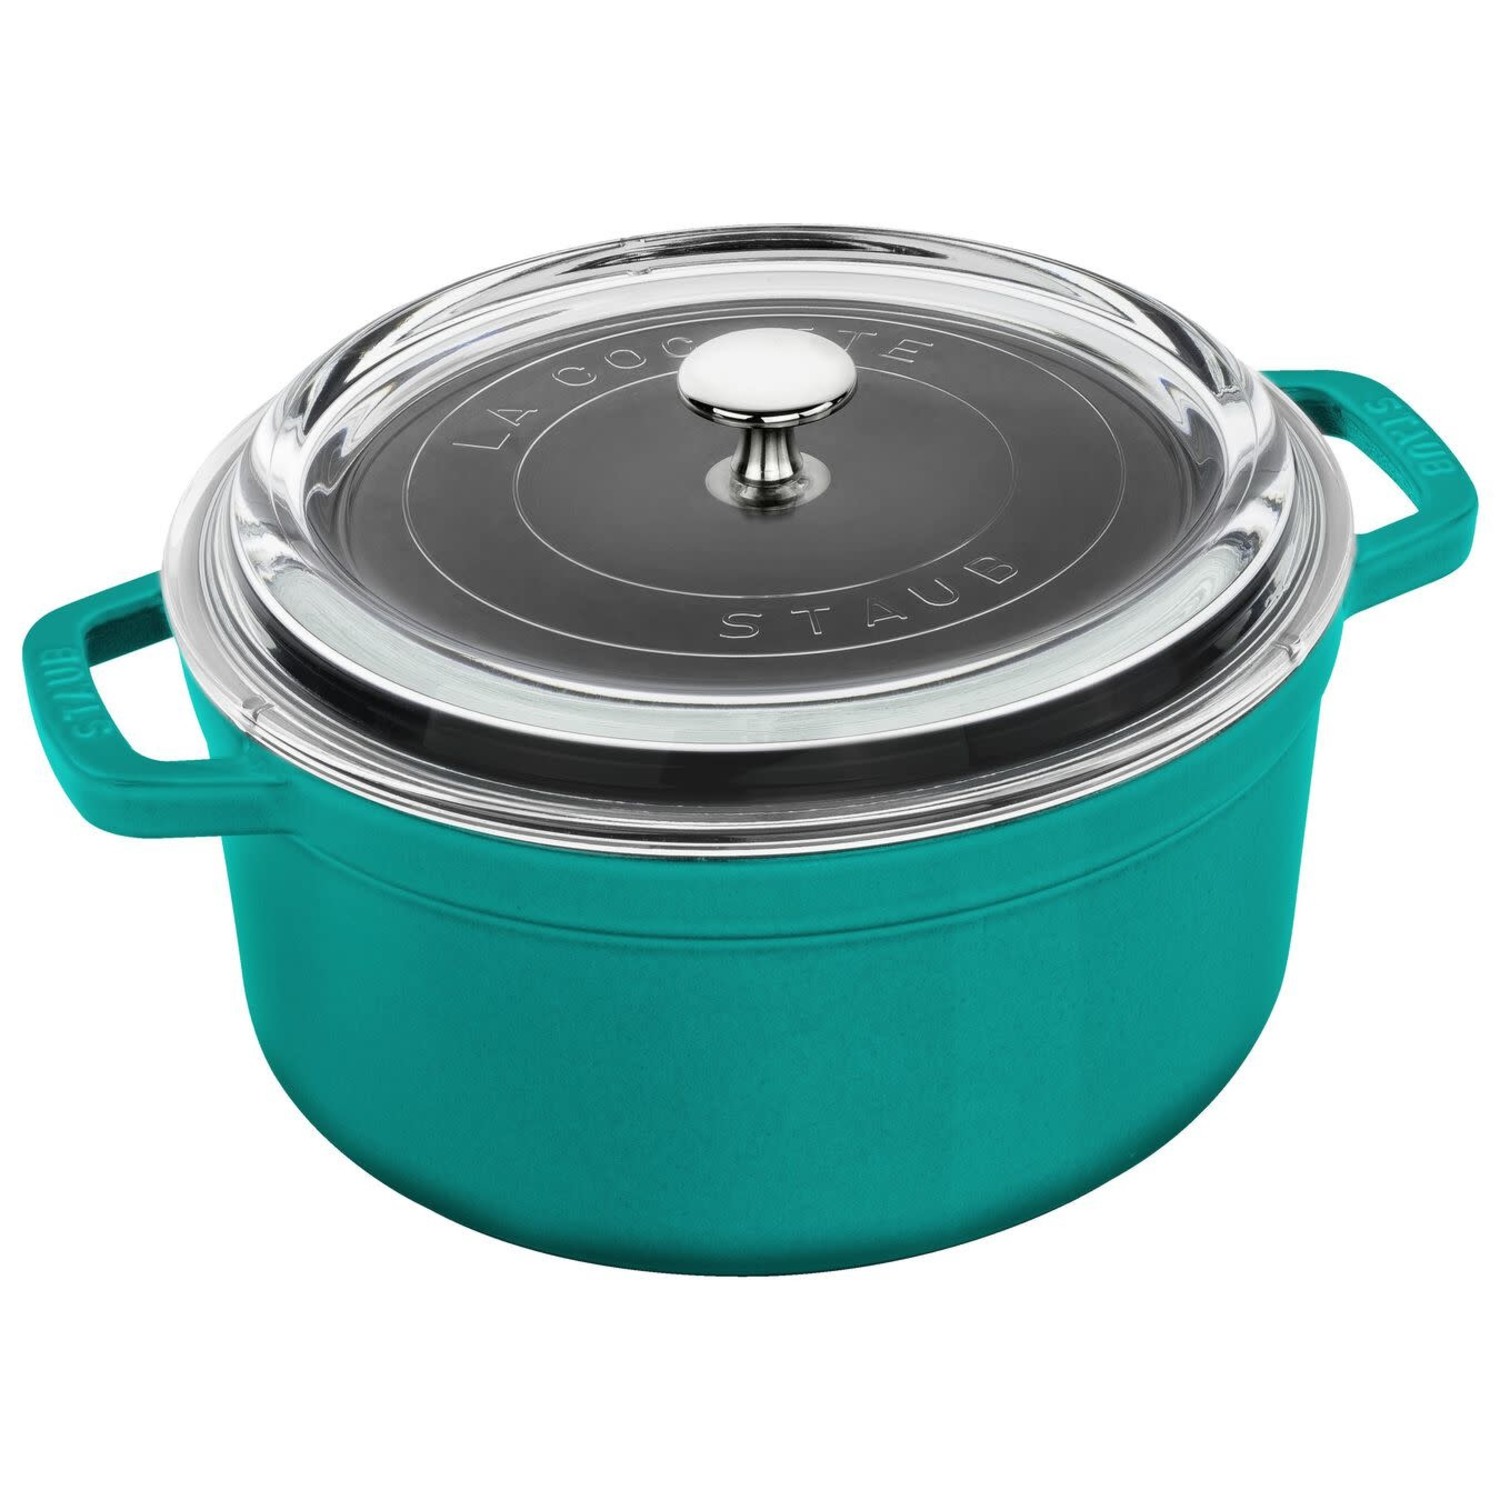 Can a Dutch Oven Have a Glass Lid 